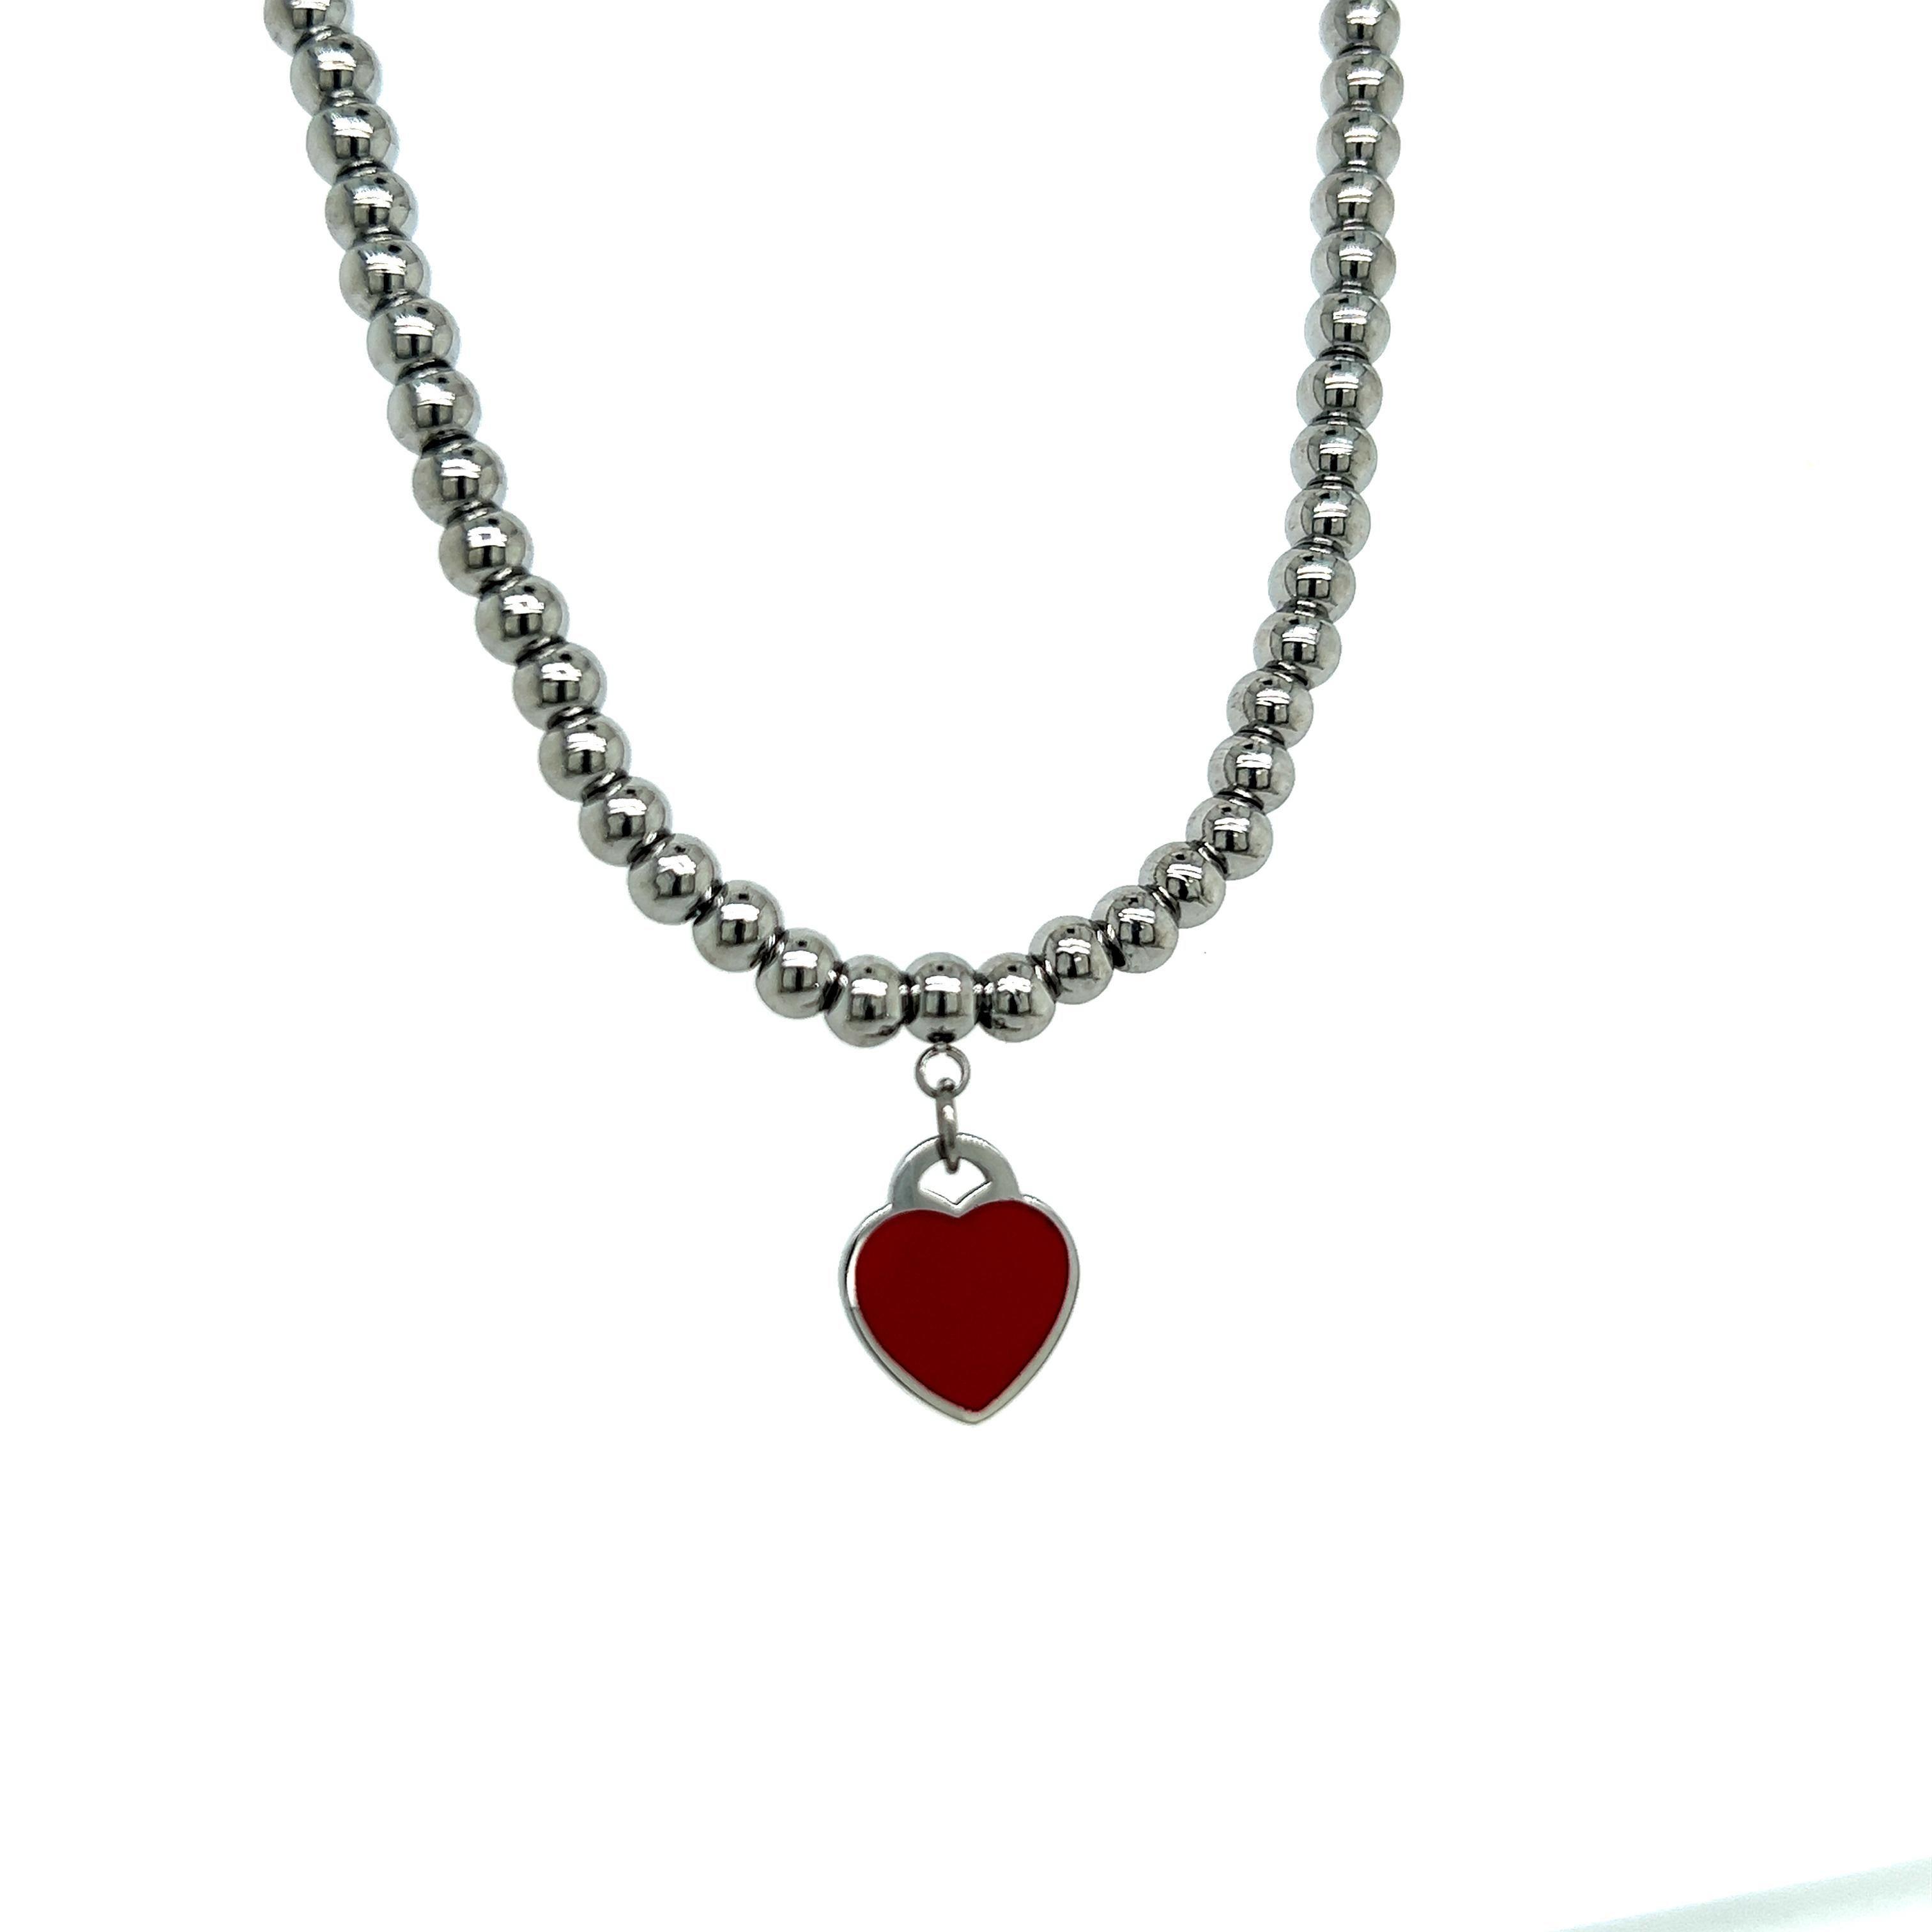 tiffany red heart necklace gold